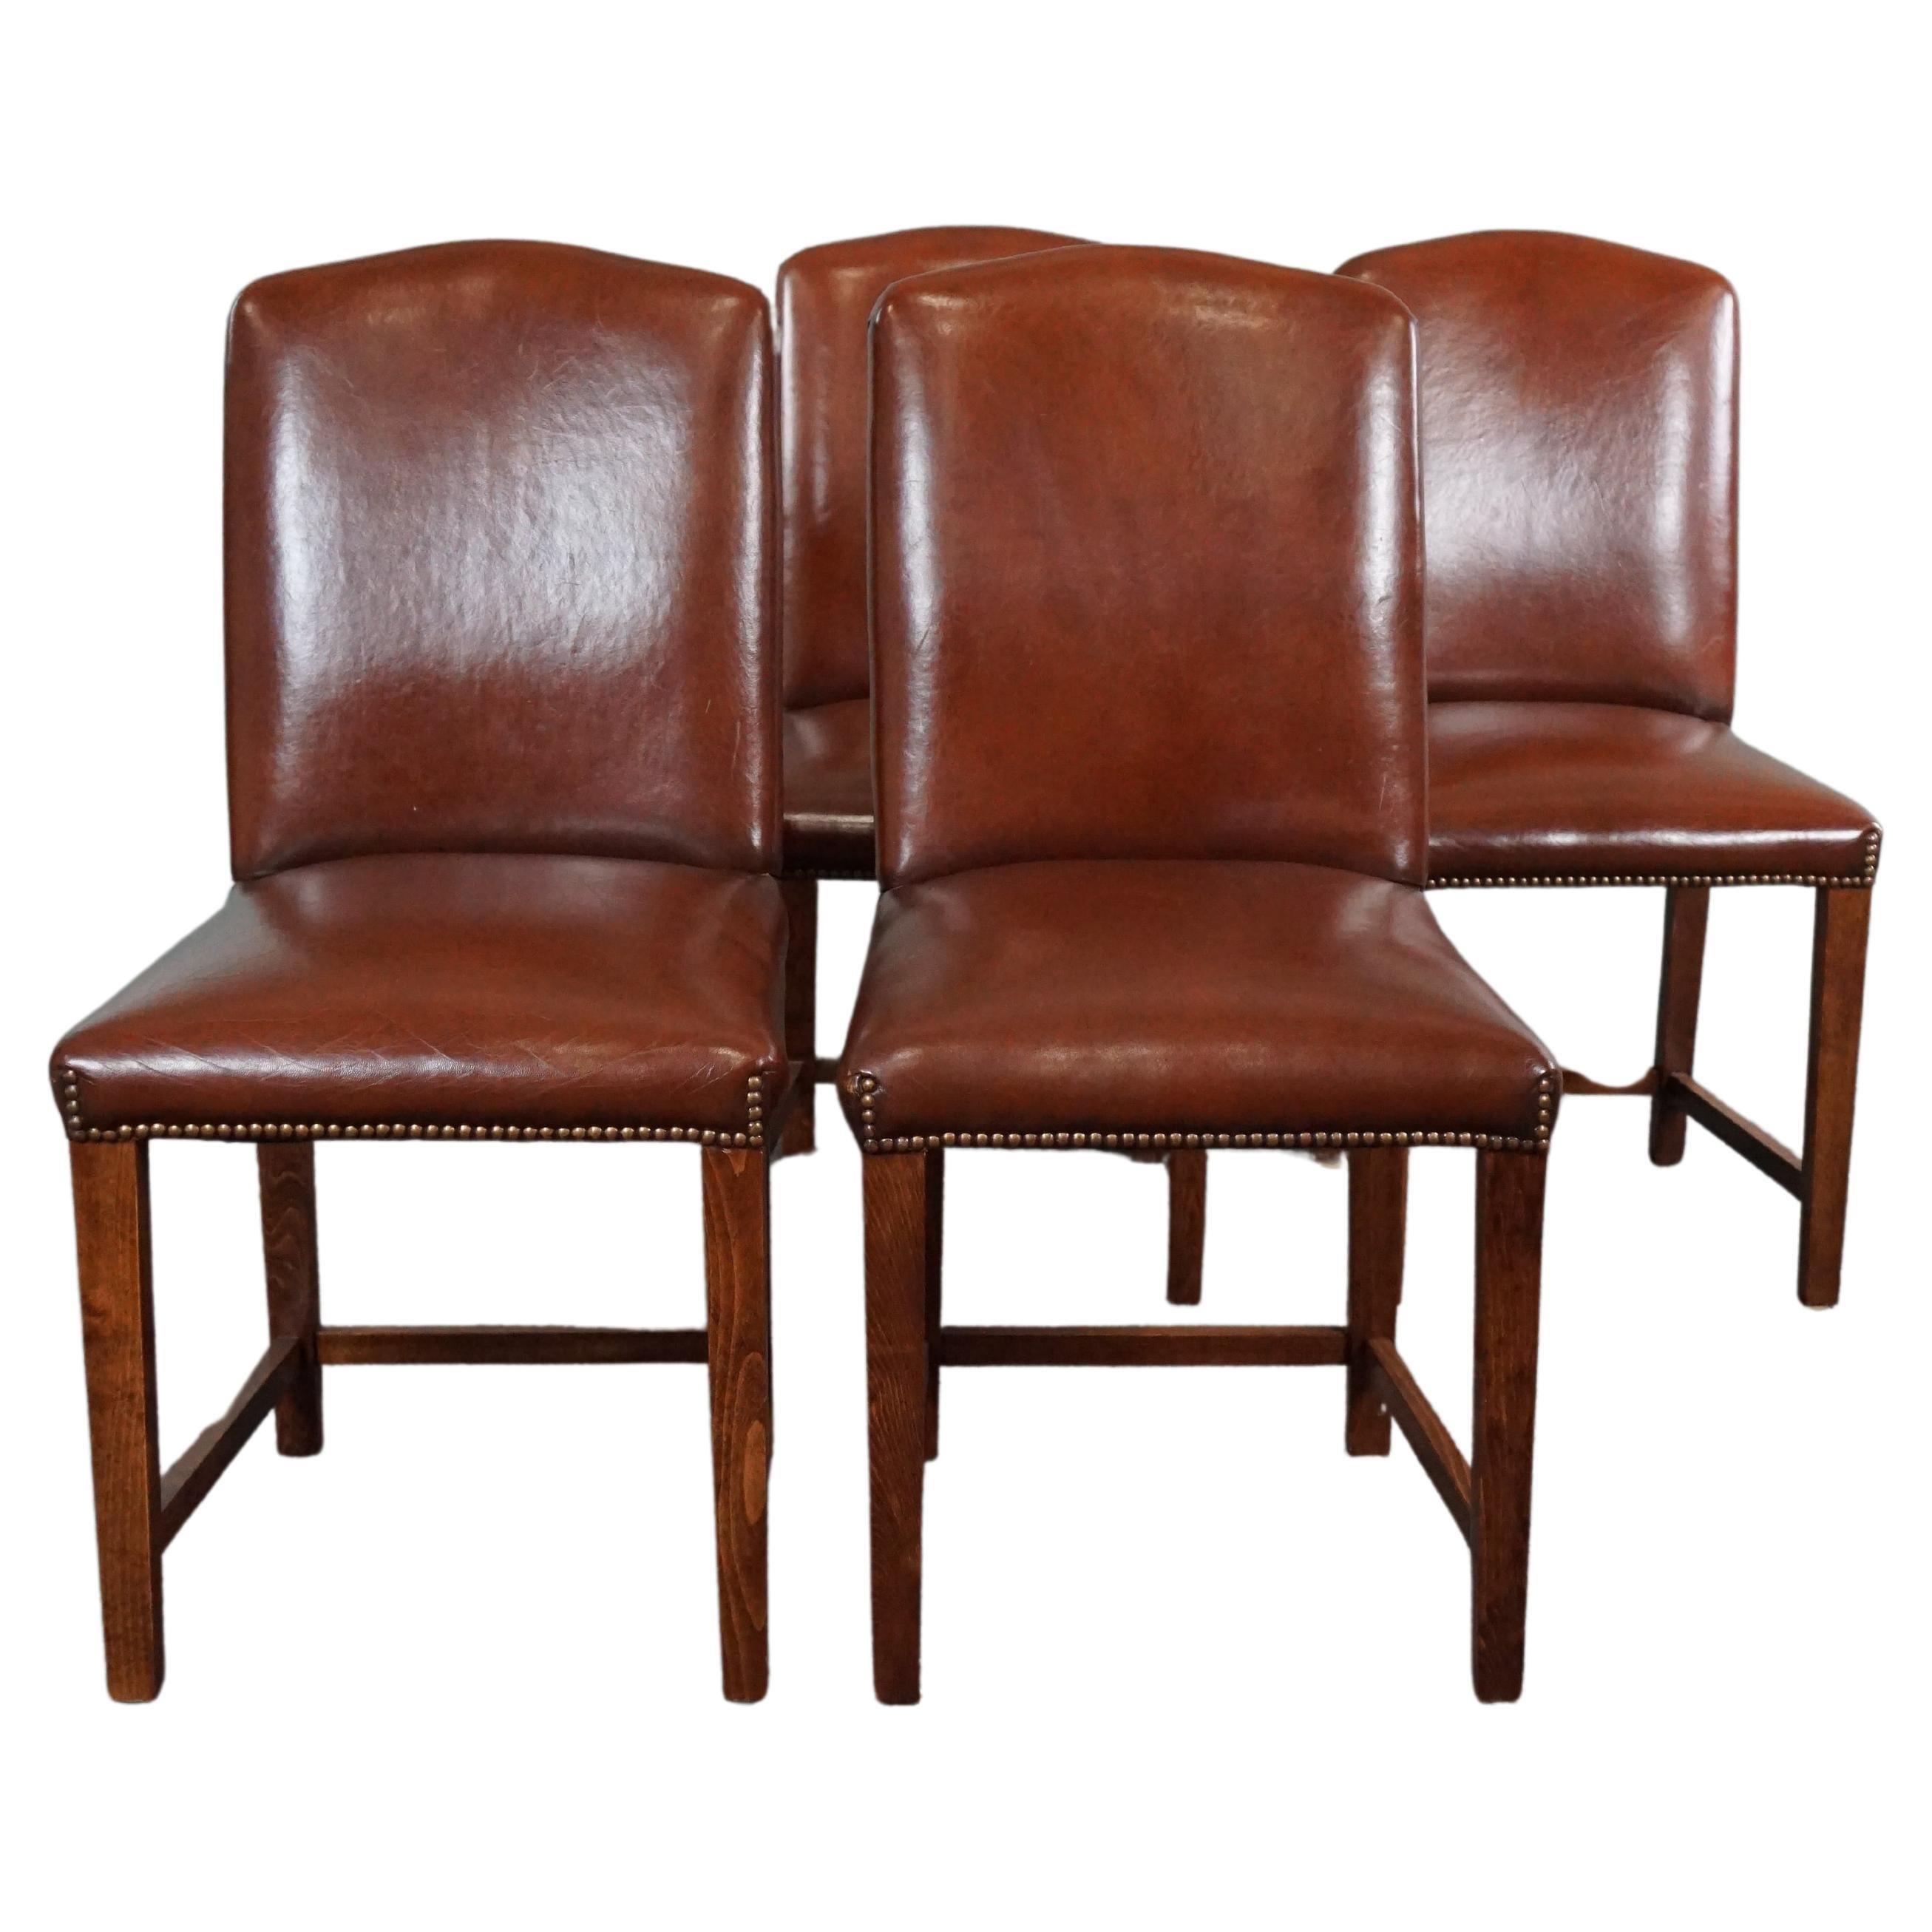 Solid set of 4 sheep leather dining room chairs